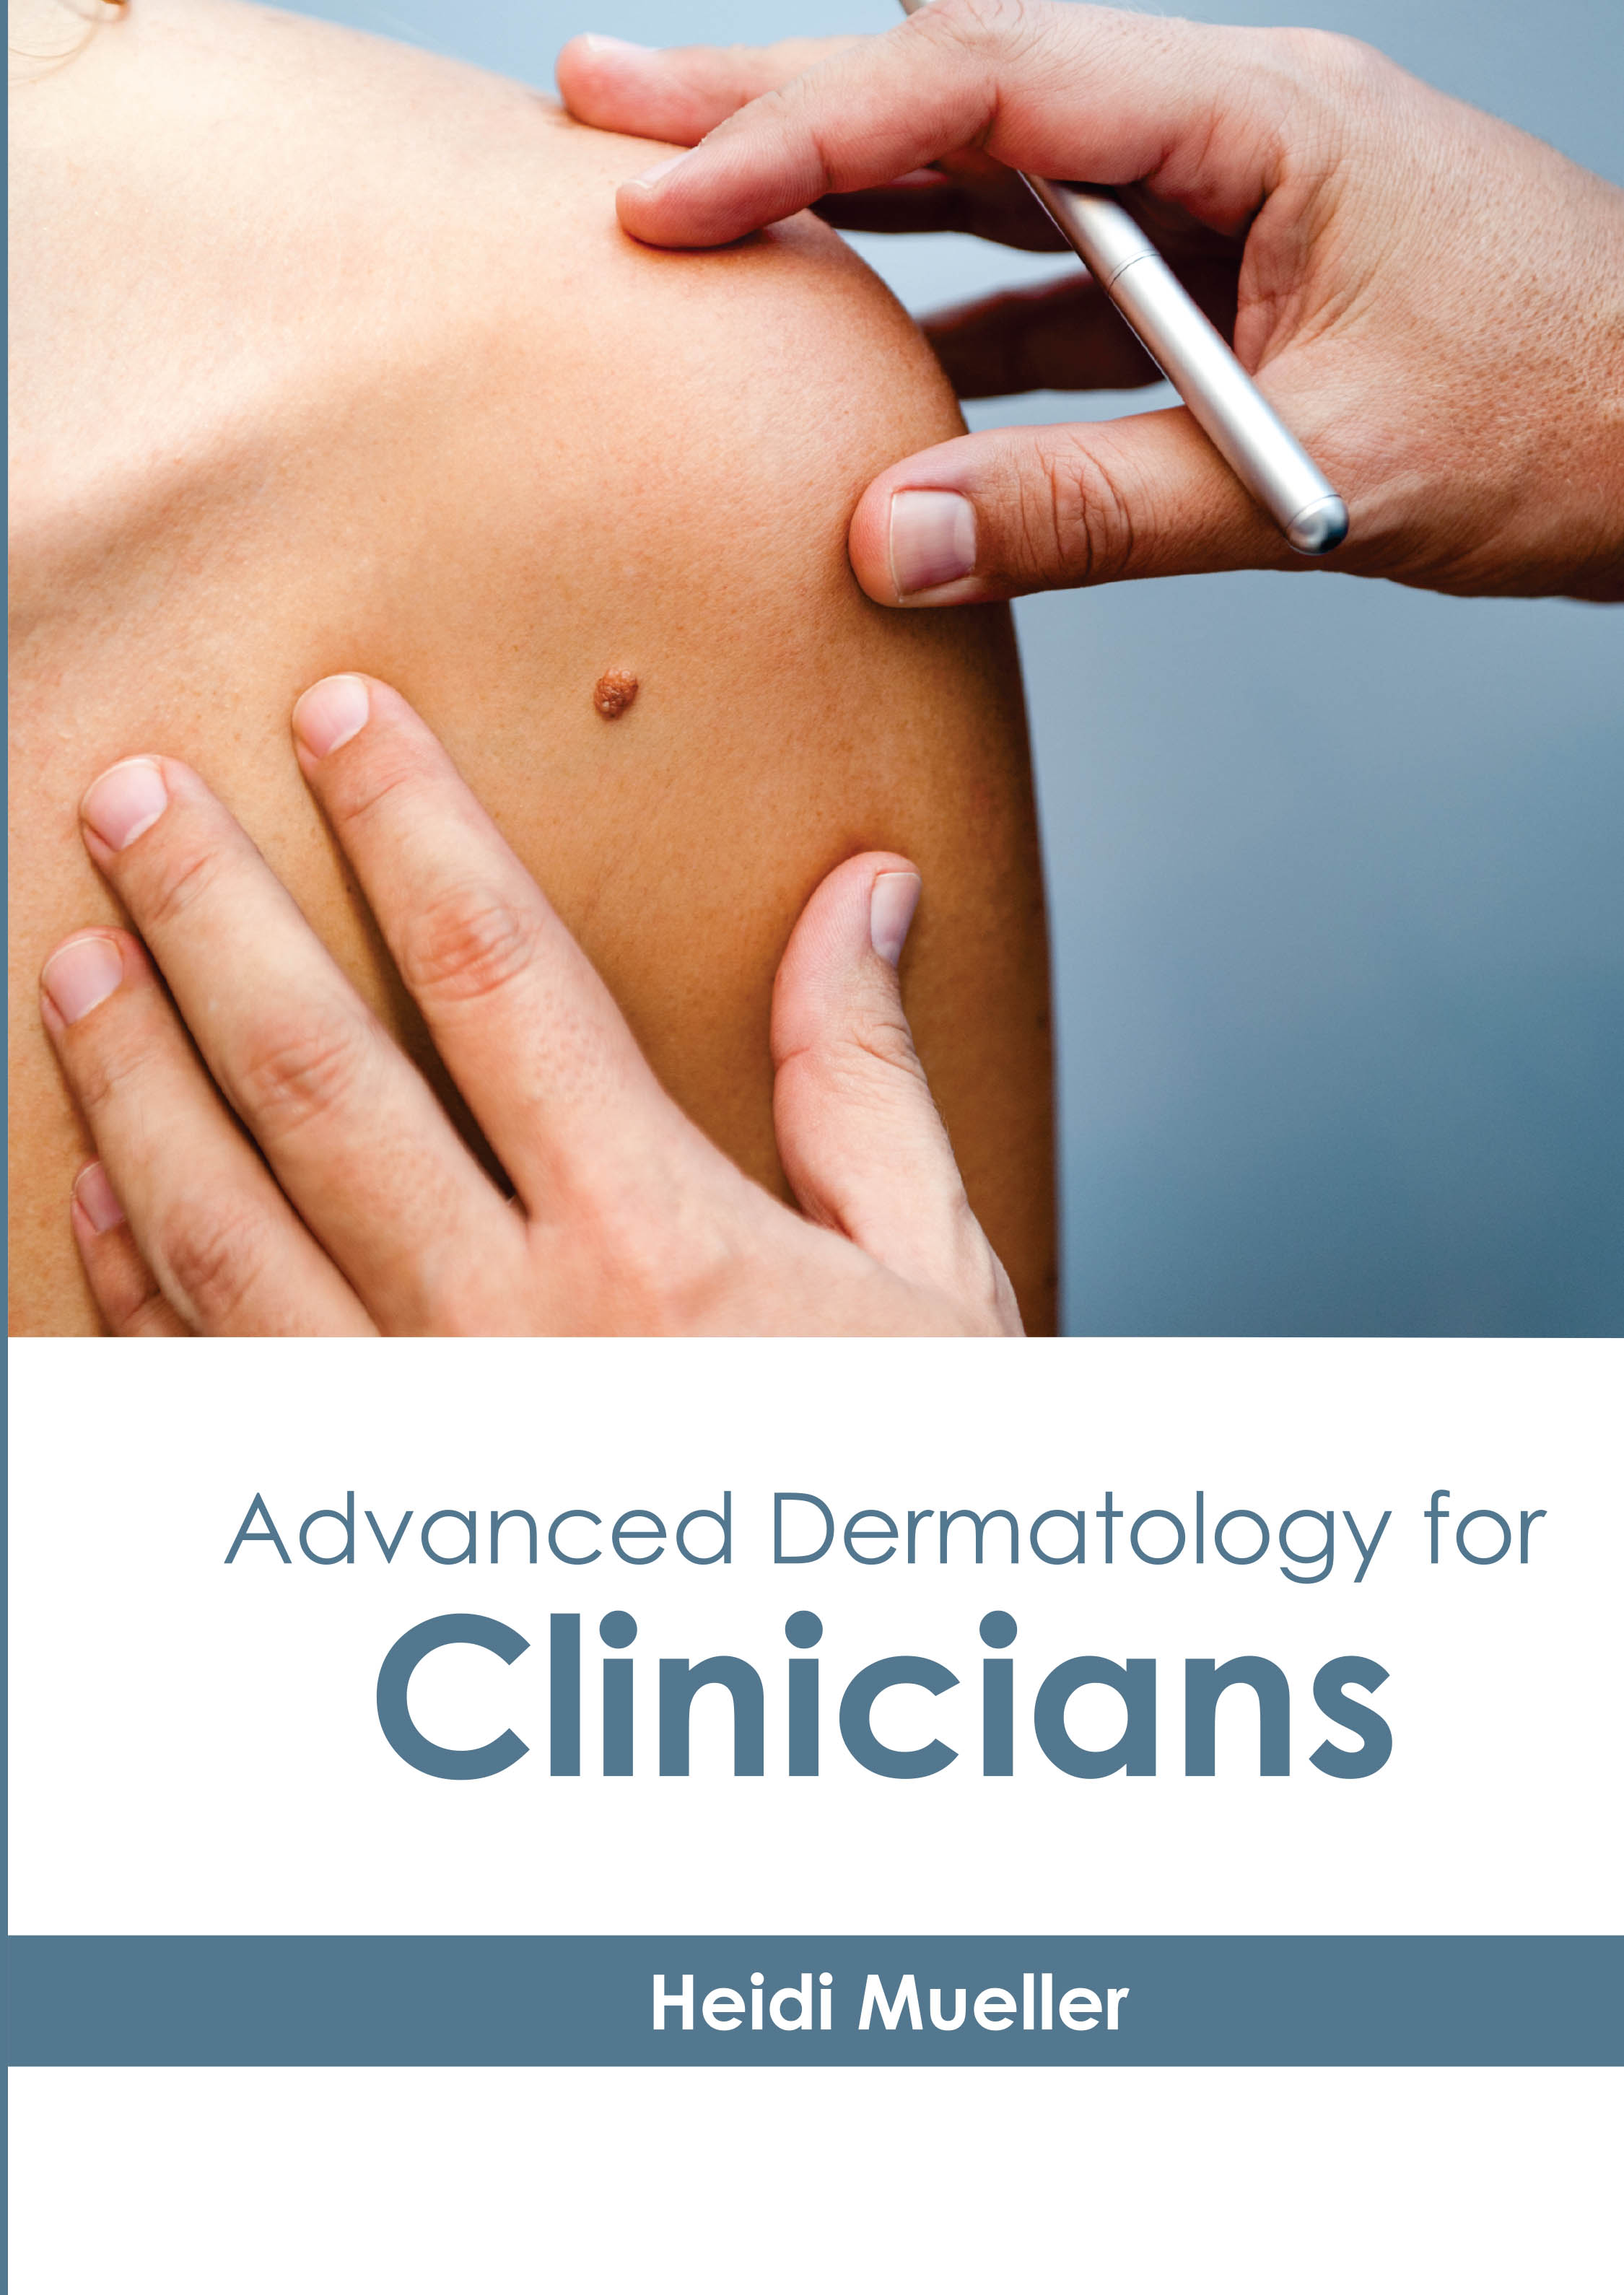 
exclusive-publishers/american-medical-publishers/advanced-dermatology-for-clinicians-9781639270637